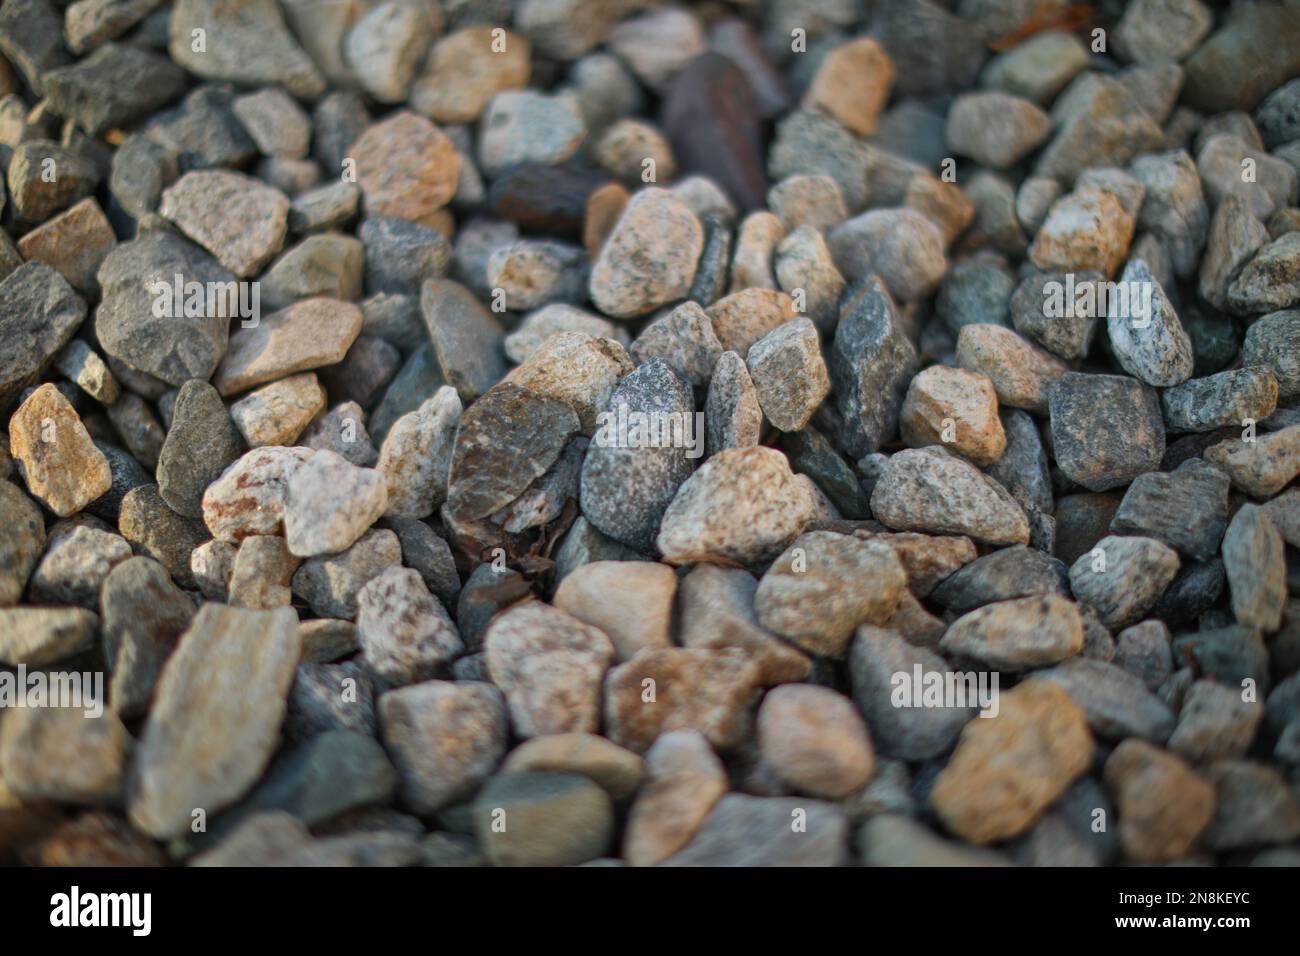 rocks on the ground textured material Stock Photo